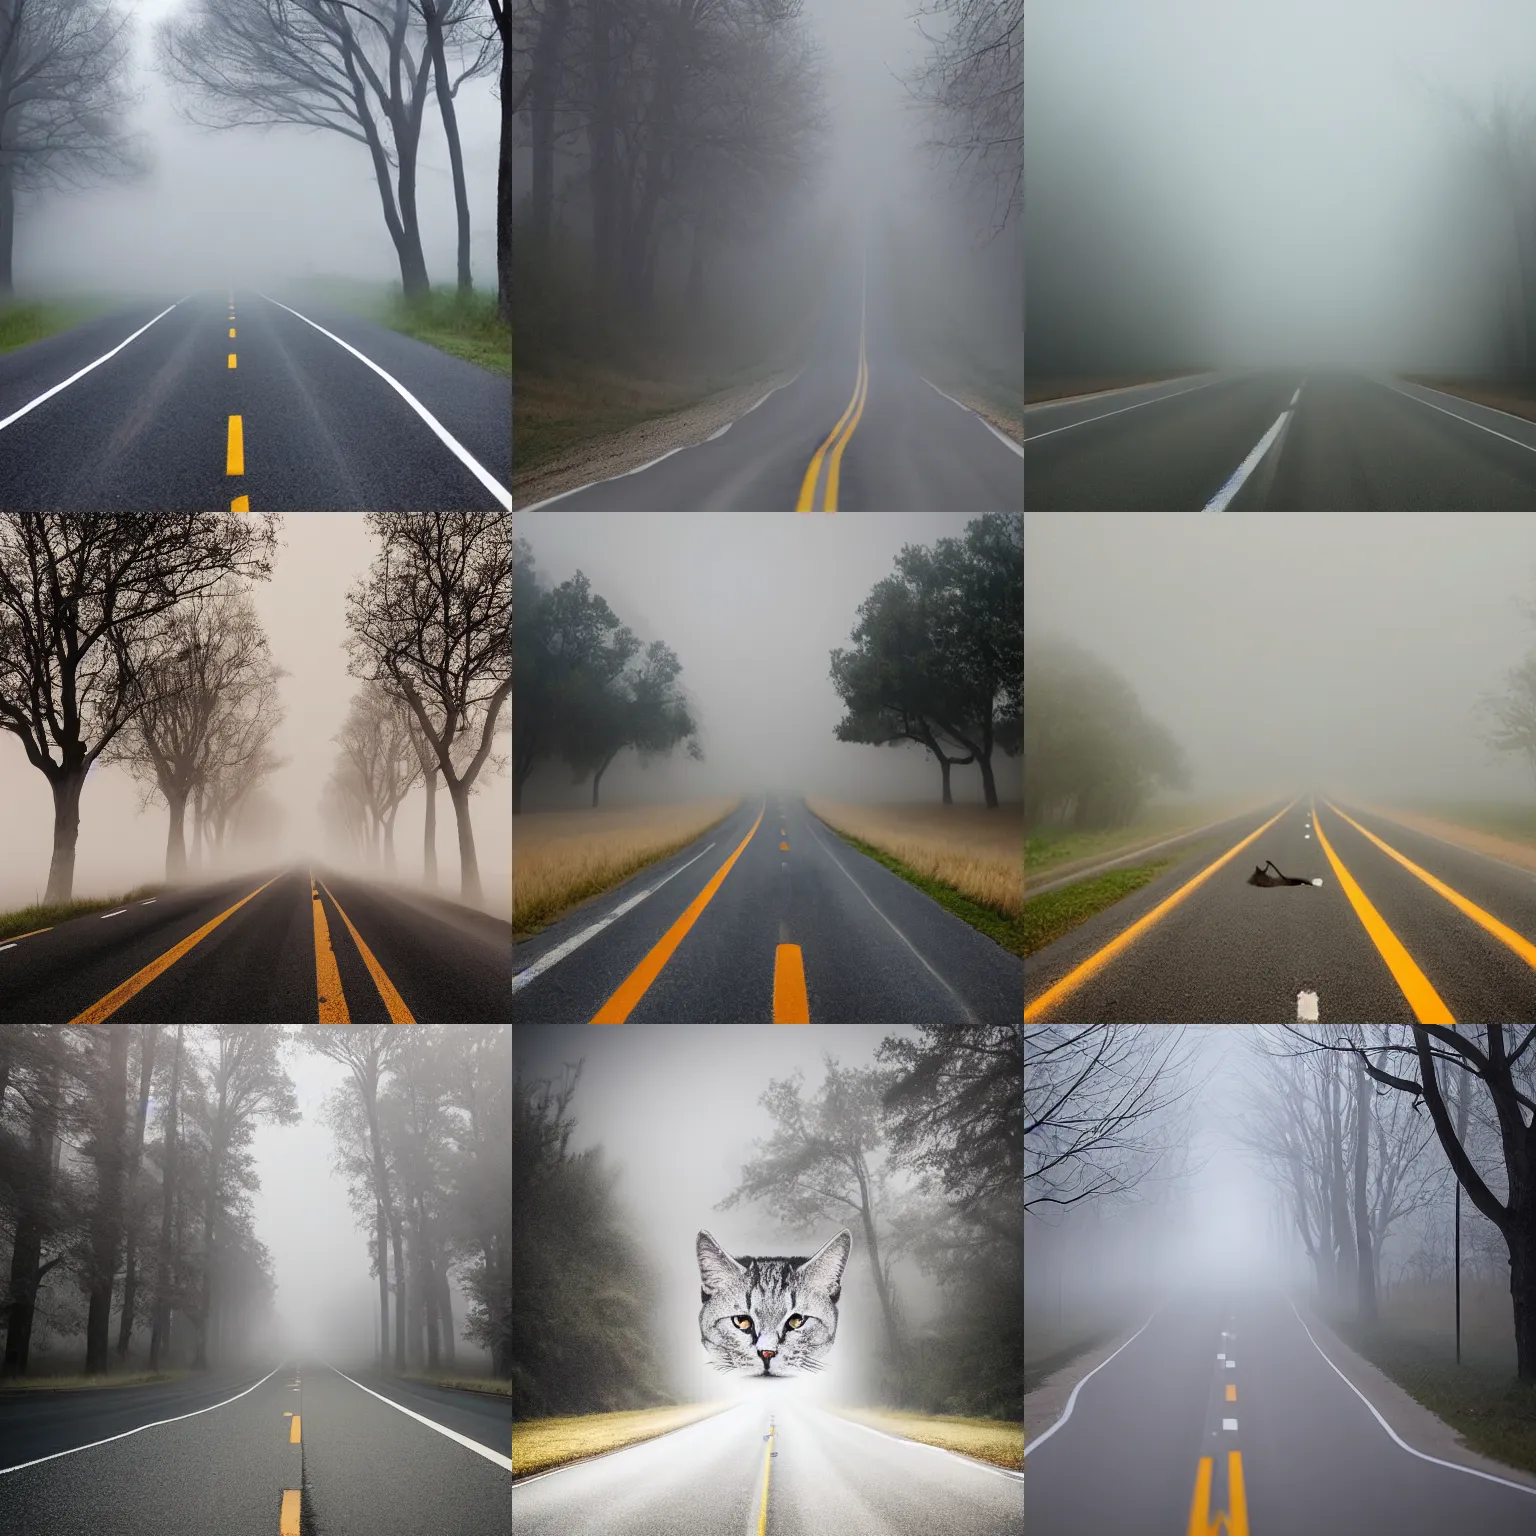 Prompt: An extreme long shot photo of a foggy deserted road, giant cats with huge eyes emerging from the fog, megalophobia, 1120mm lens